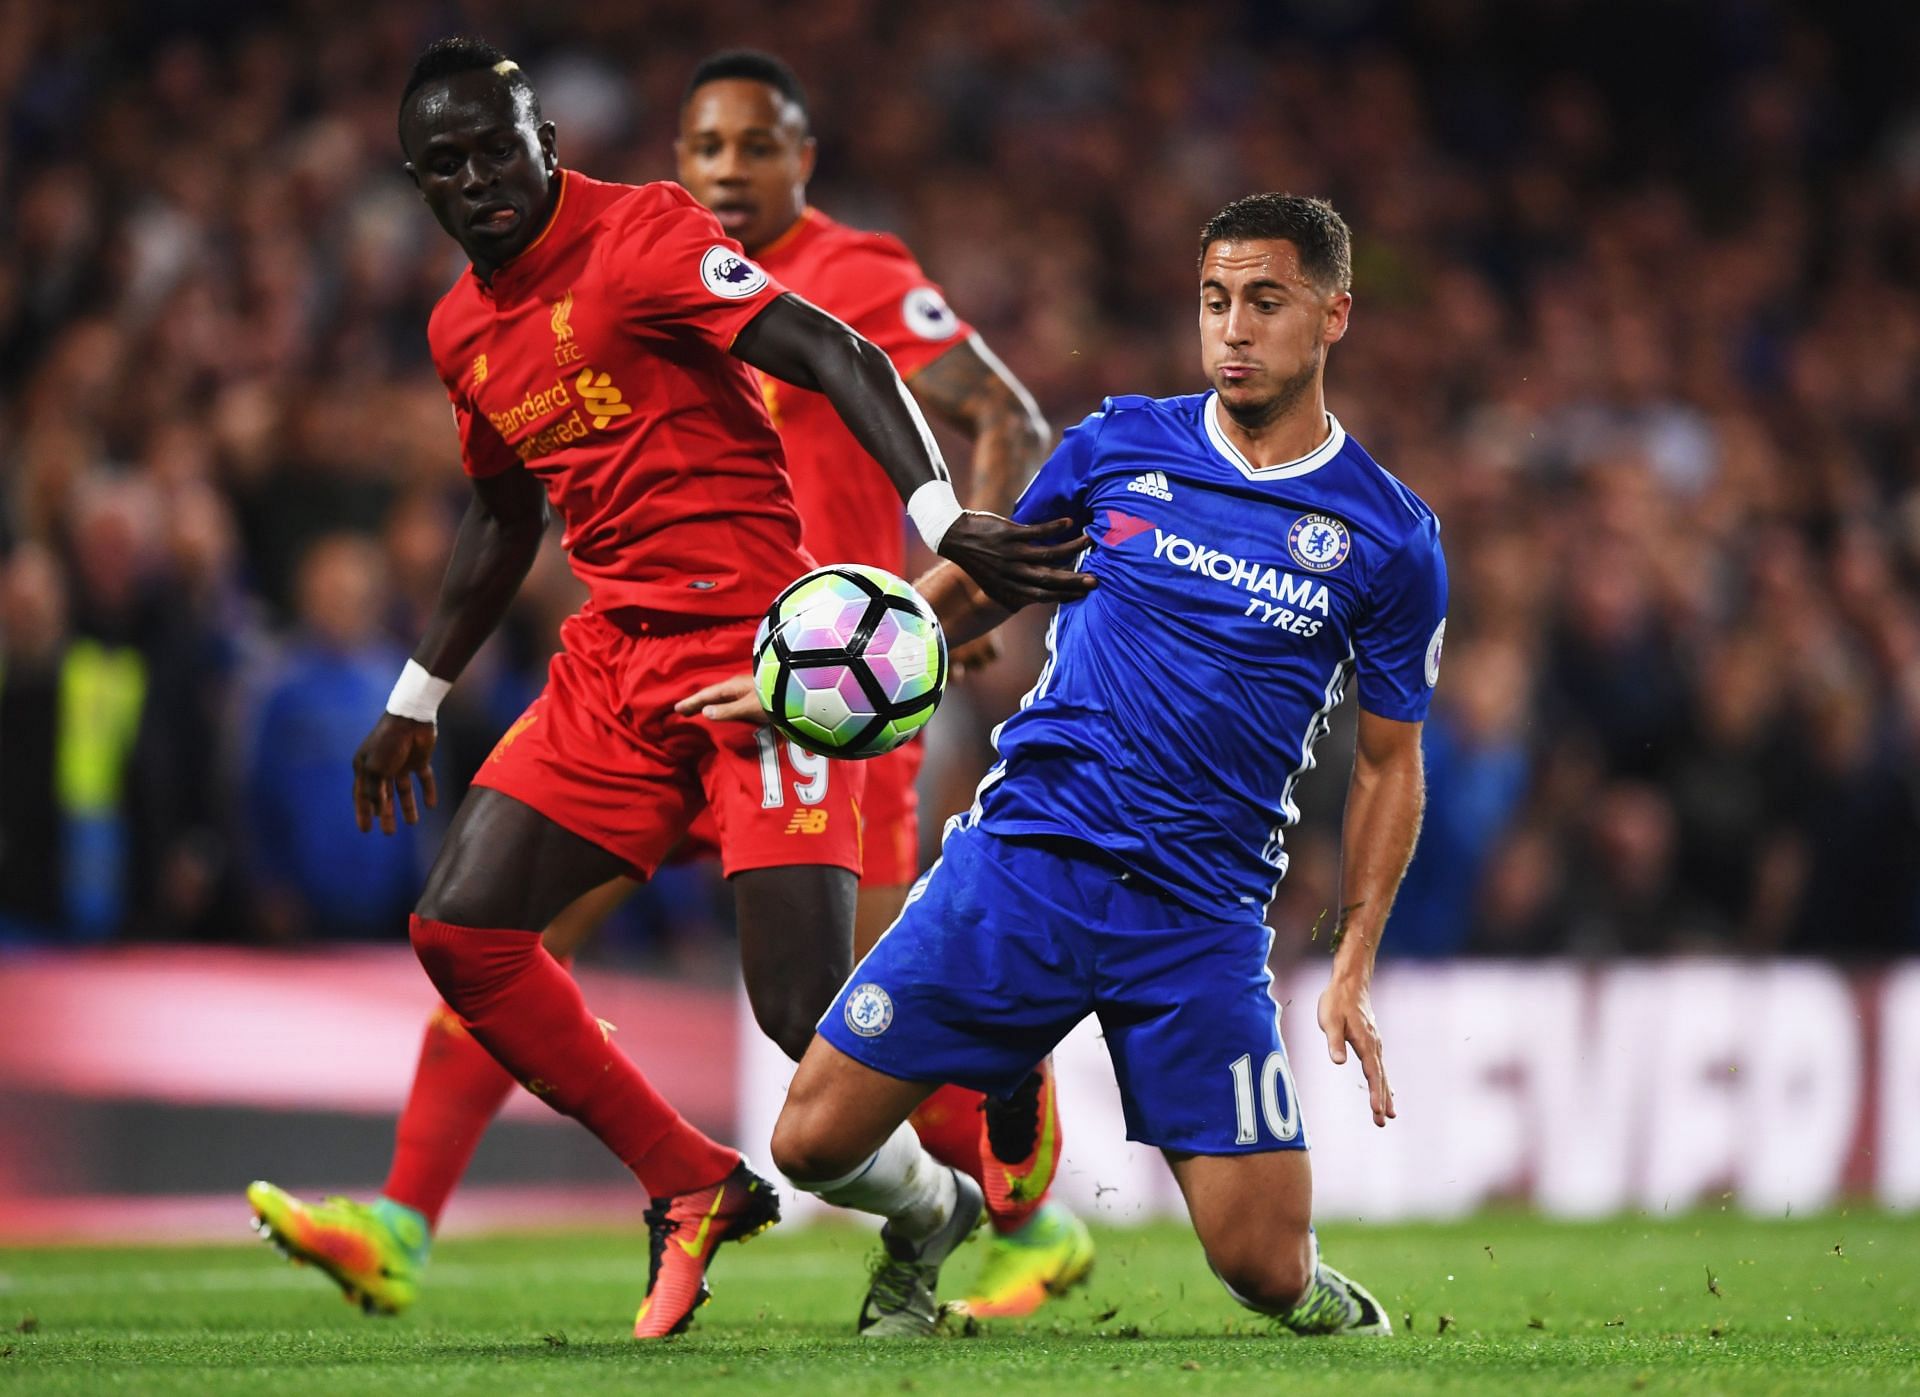 Mane and Hazard have been the best Premier League left wingers in recent times